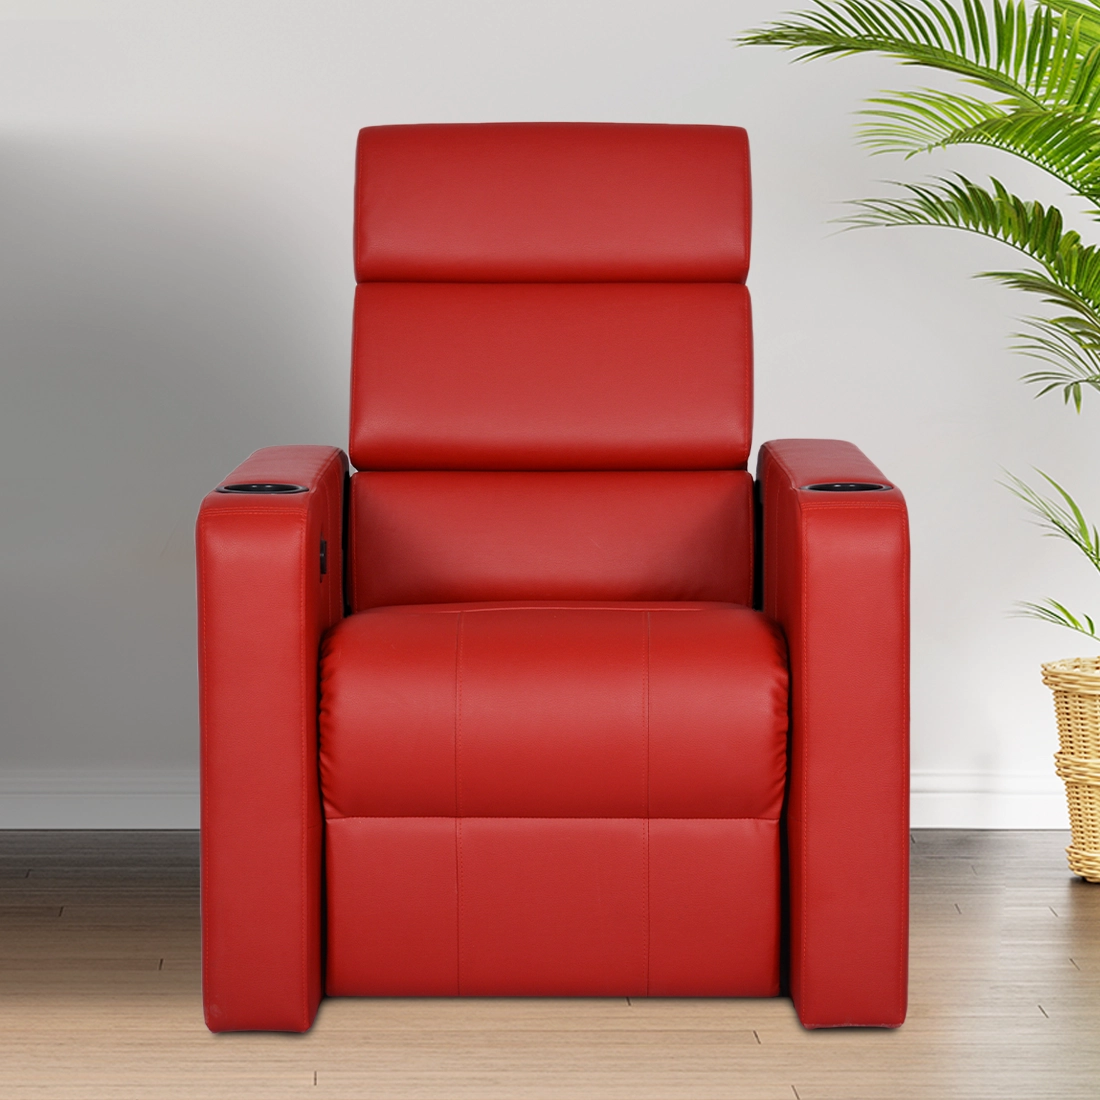 Home Theater Recliner Chair Miami